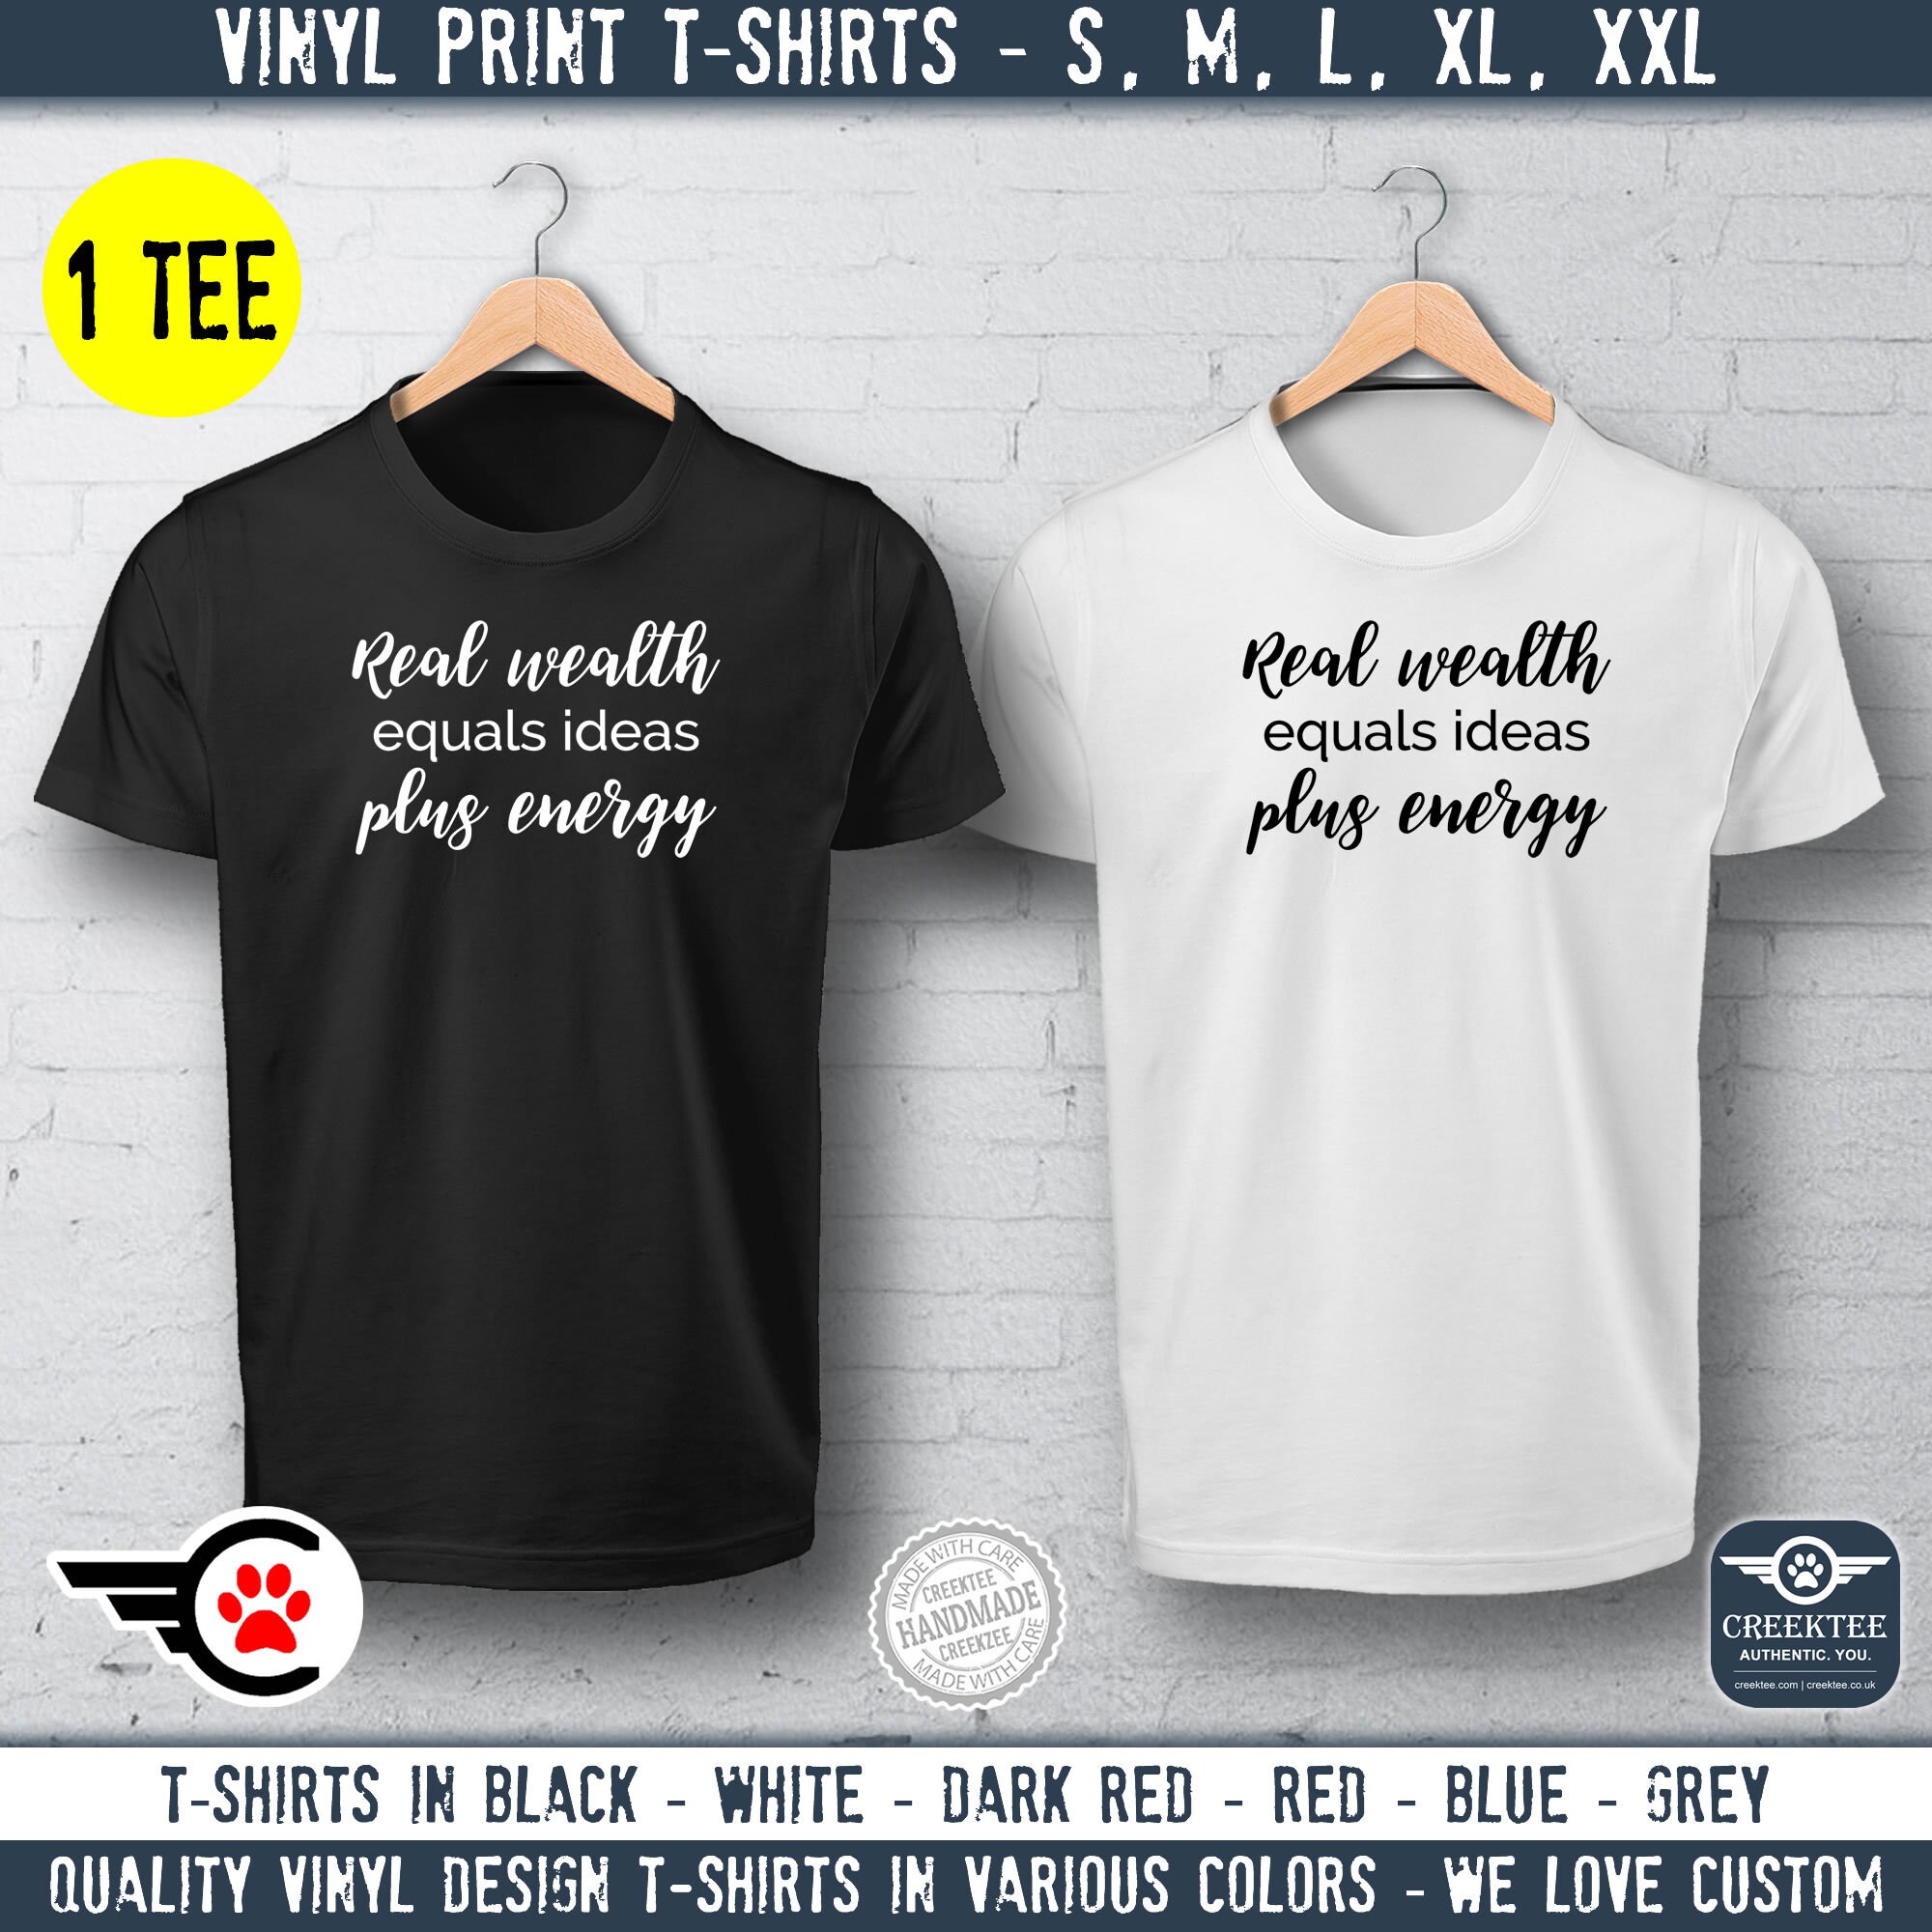 Real wealth equals ideas plus energy Vinyl Print T-shirt Unisex Funny t-shirt, Customize your tee. Ask us! - 1 T-Shirt